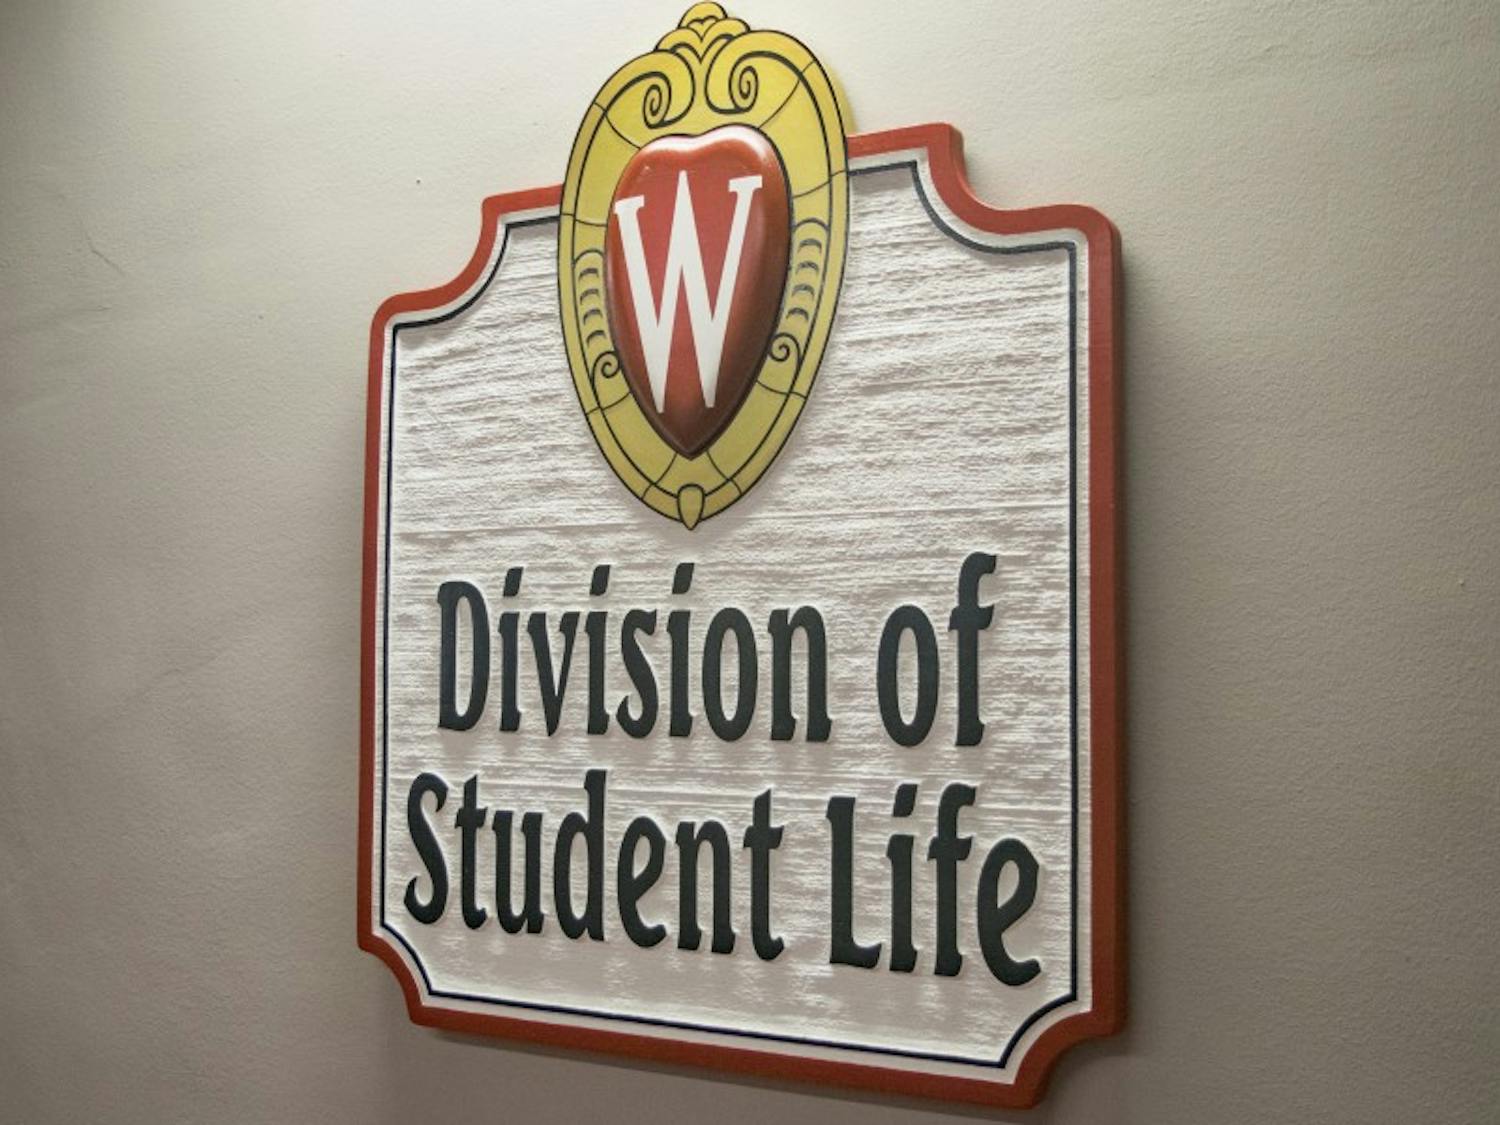 Our Wisconsin is a program from the Center for the First-Year Experience, part of the Division of Student Life.